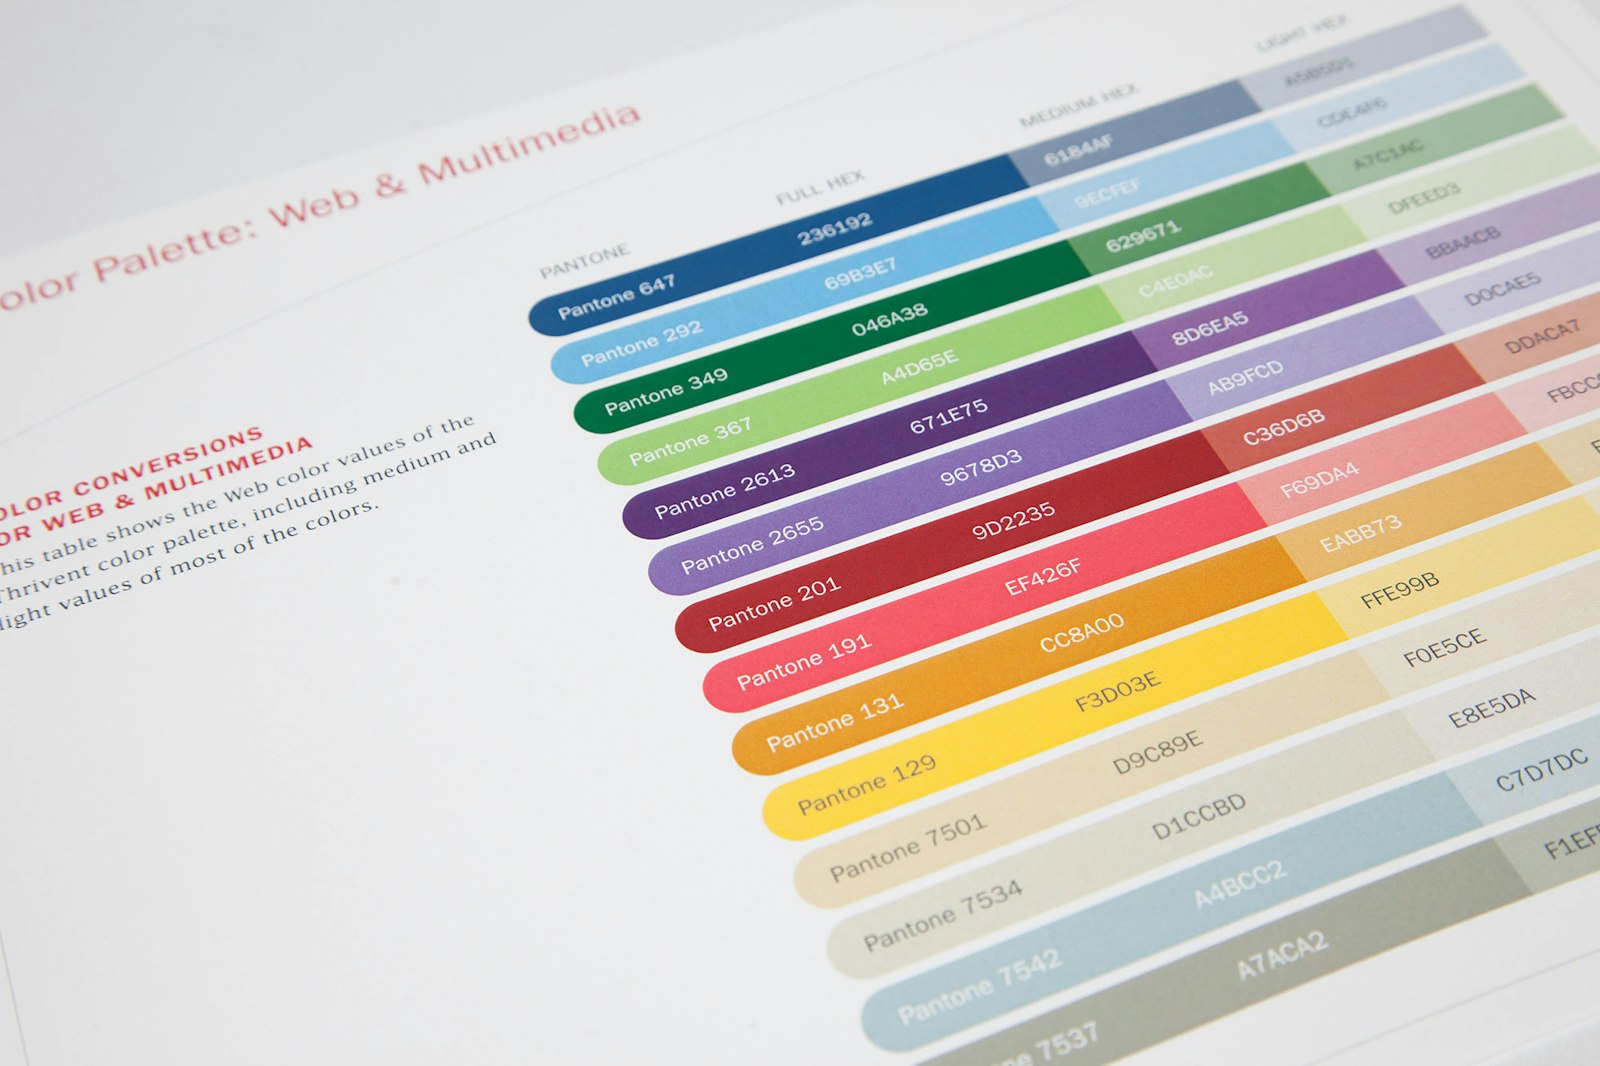 Interior pages of brand guidelines for Thrivent Financial showing the color palette standards.